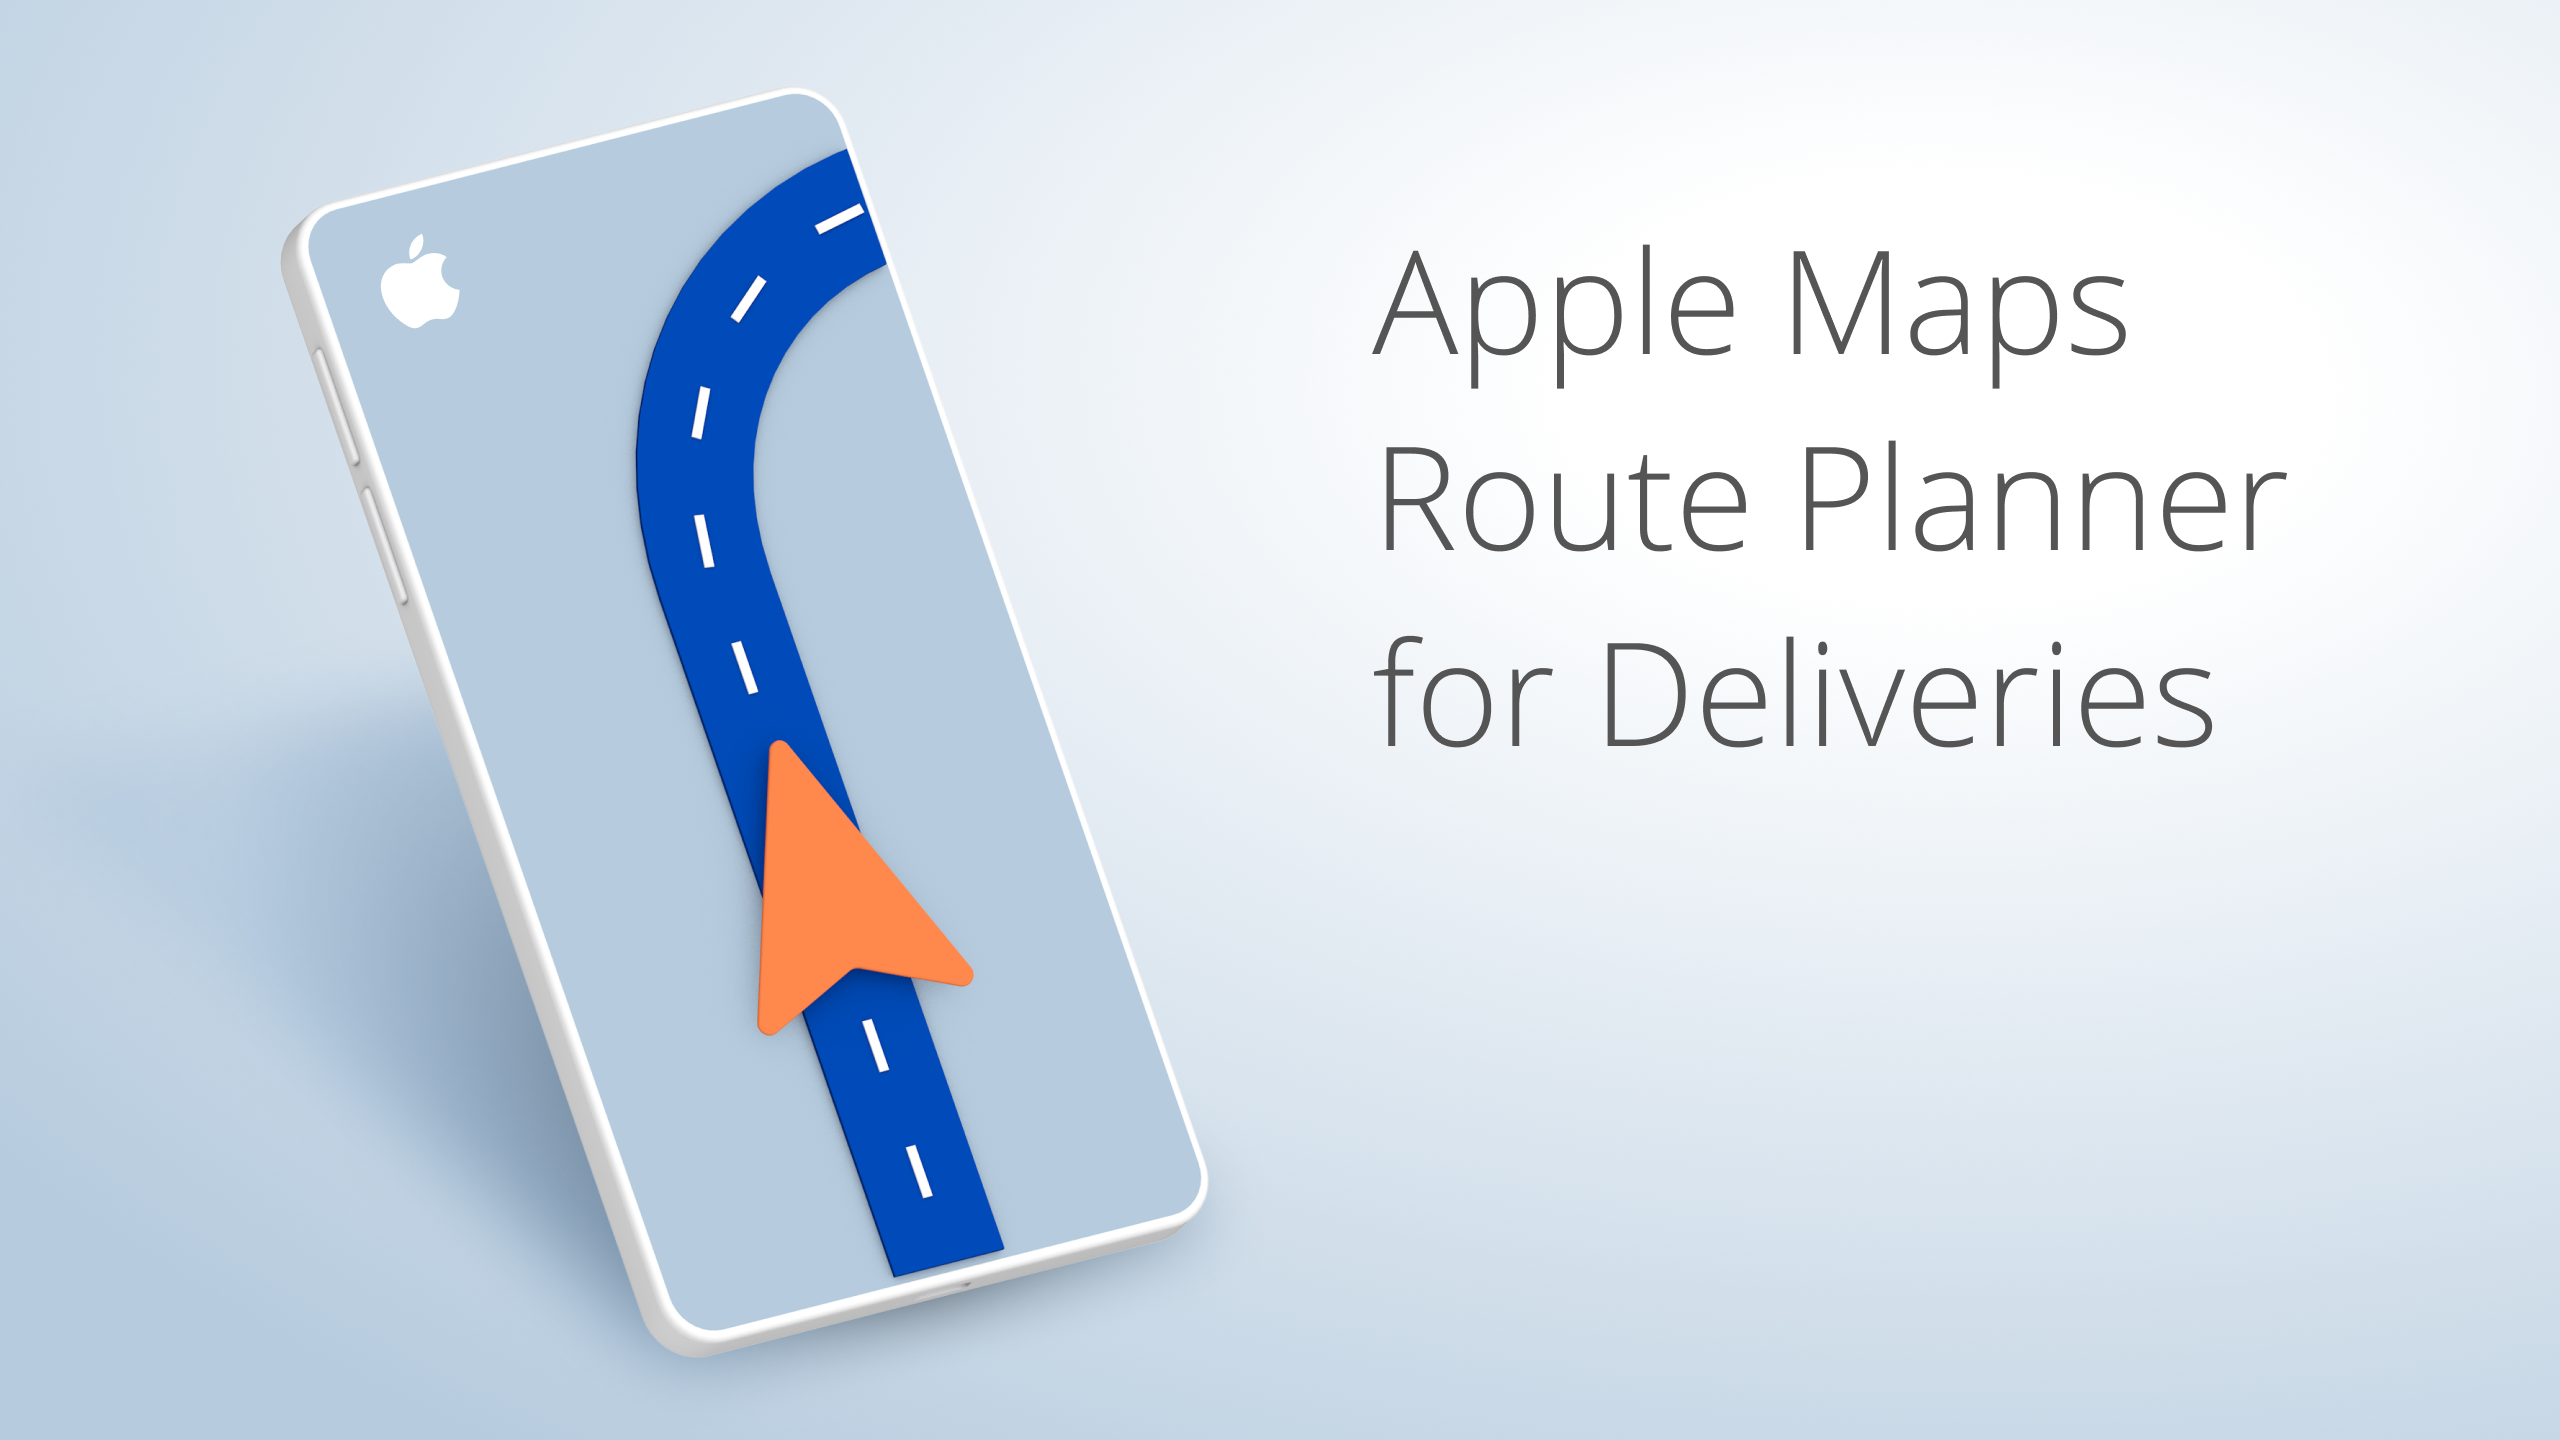 Apple Maps route planner for deliveries